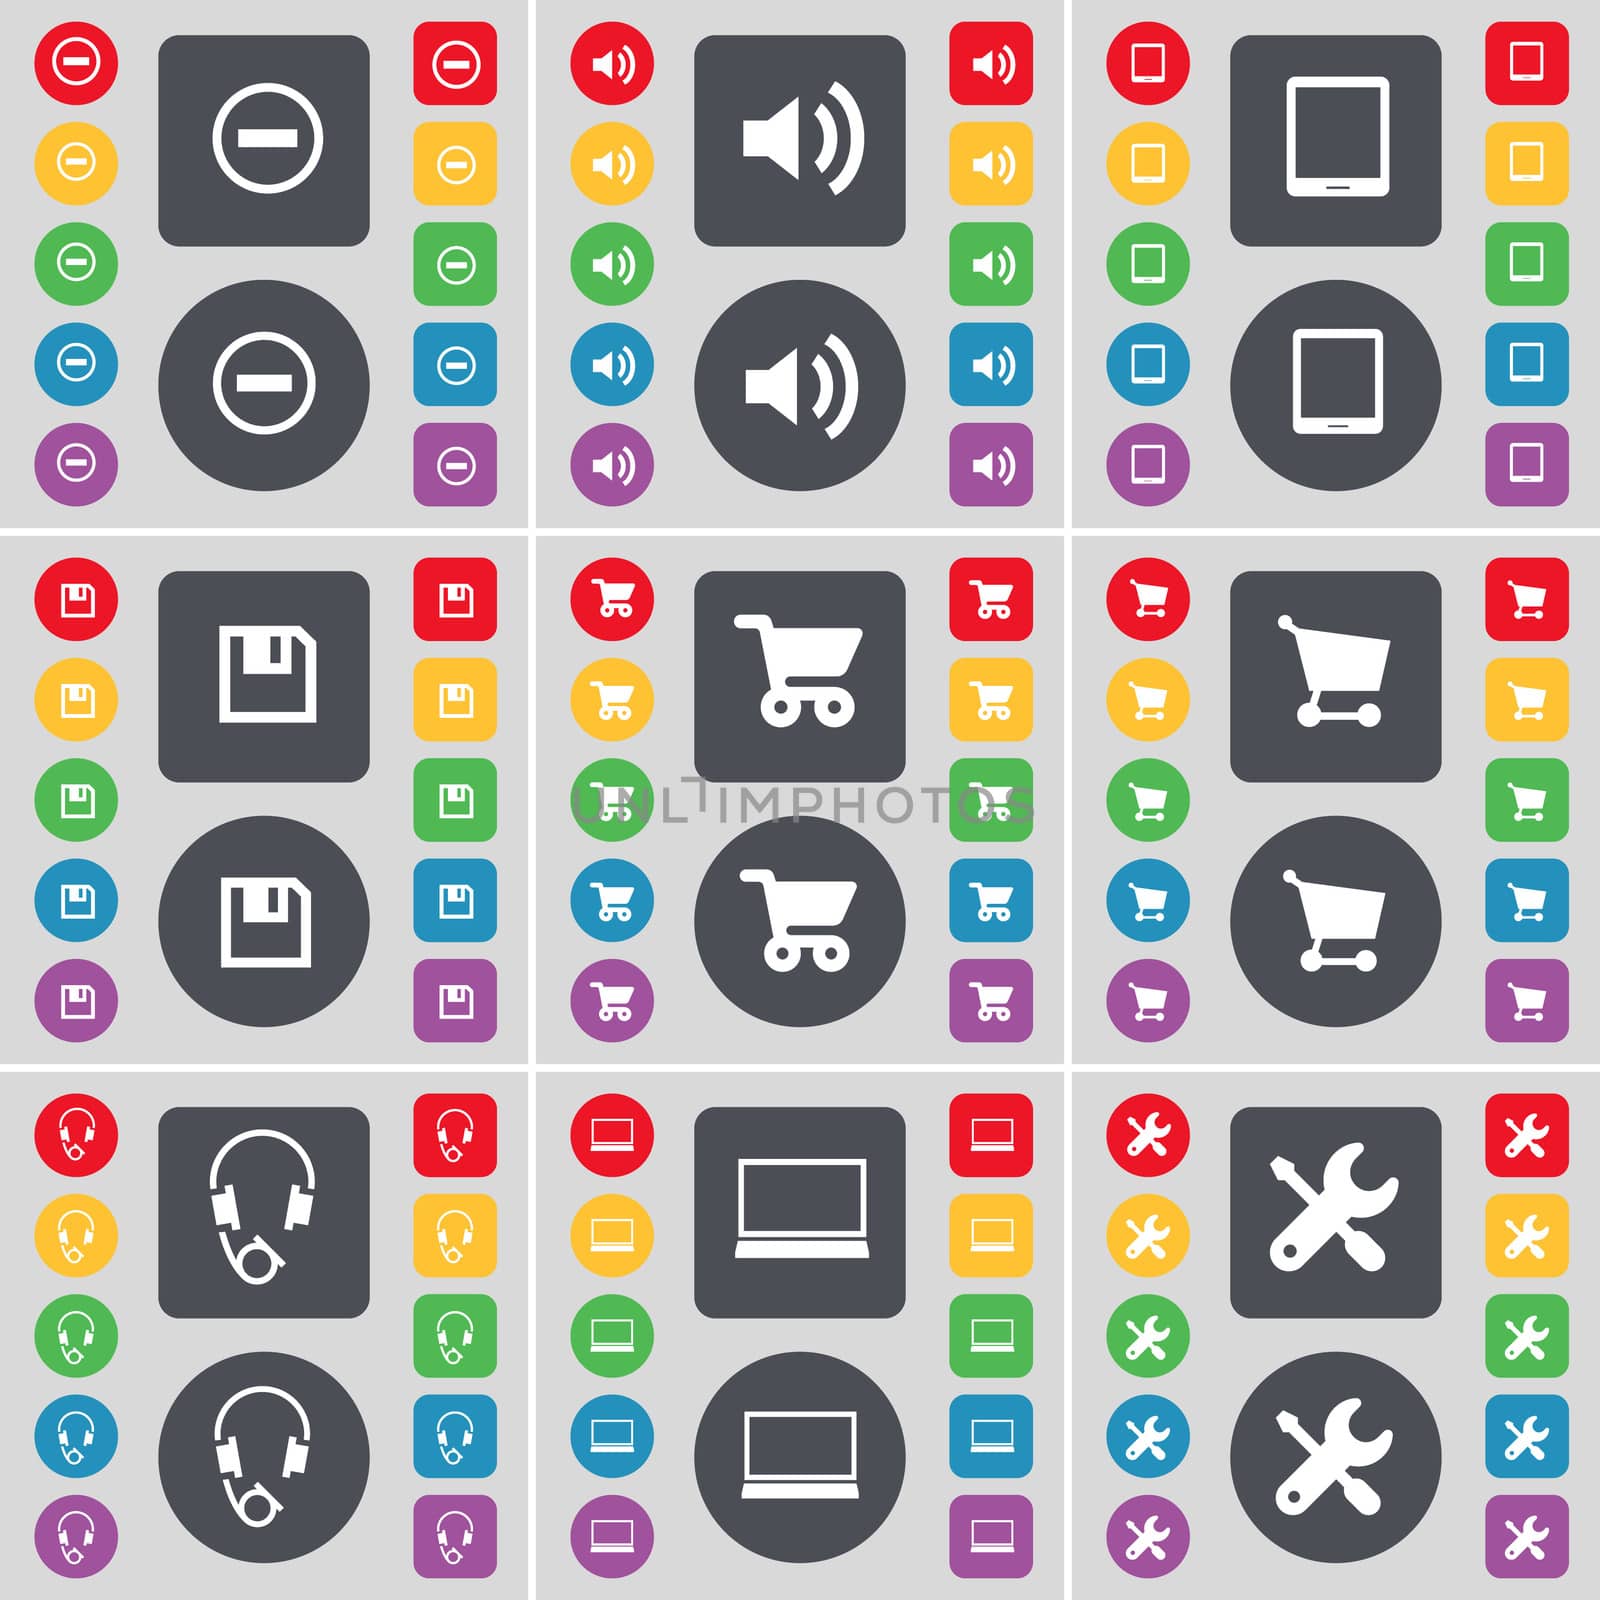 Minus, Sound, Tablet PC, Floppy, Shopping cart, Headphones, Laptop, Wrench icon symbol. A large set of flat, colored buttons for your design.  by serhii_lohvyniuk